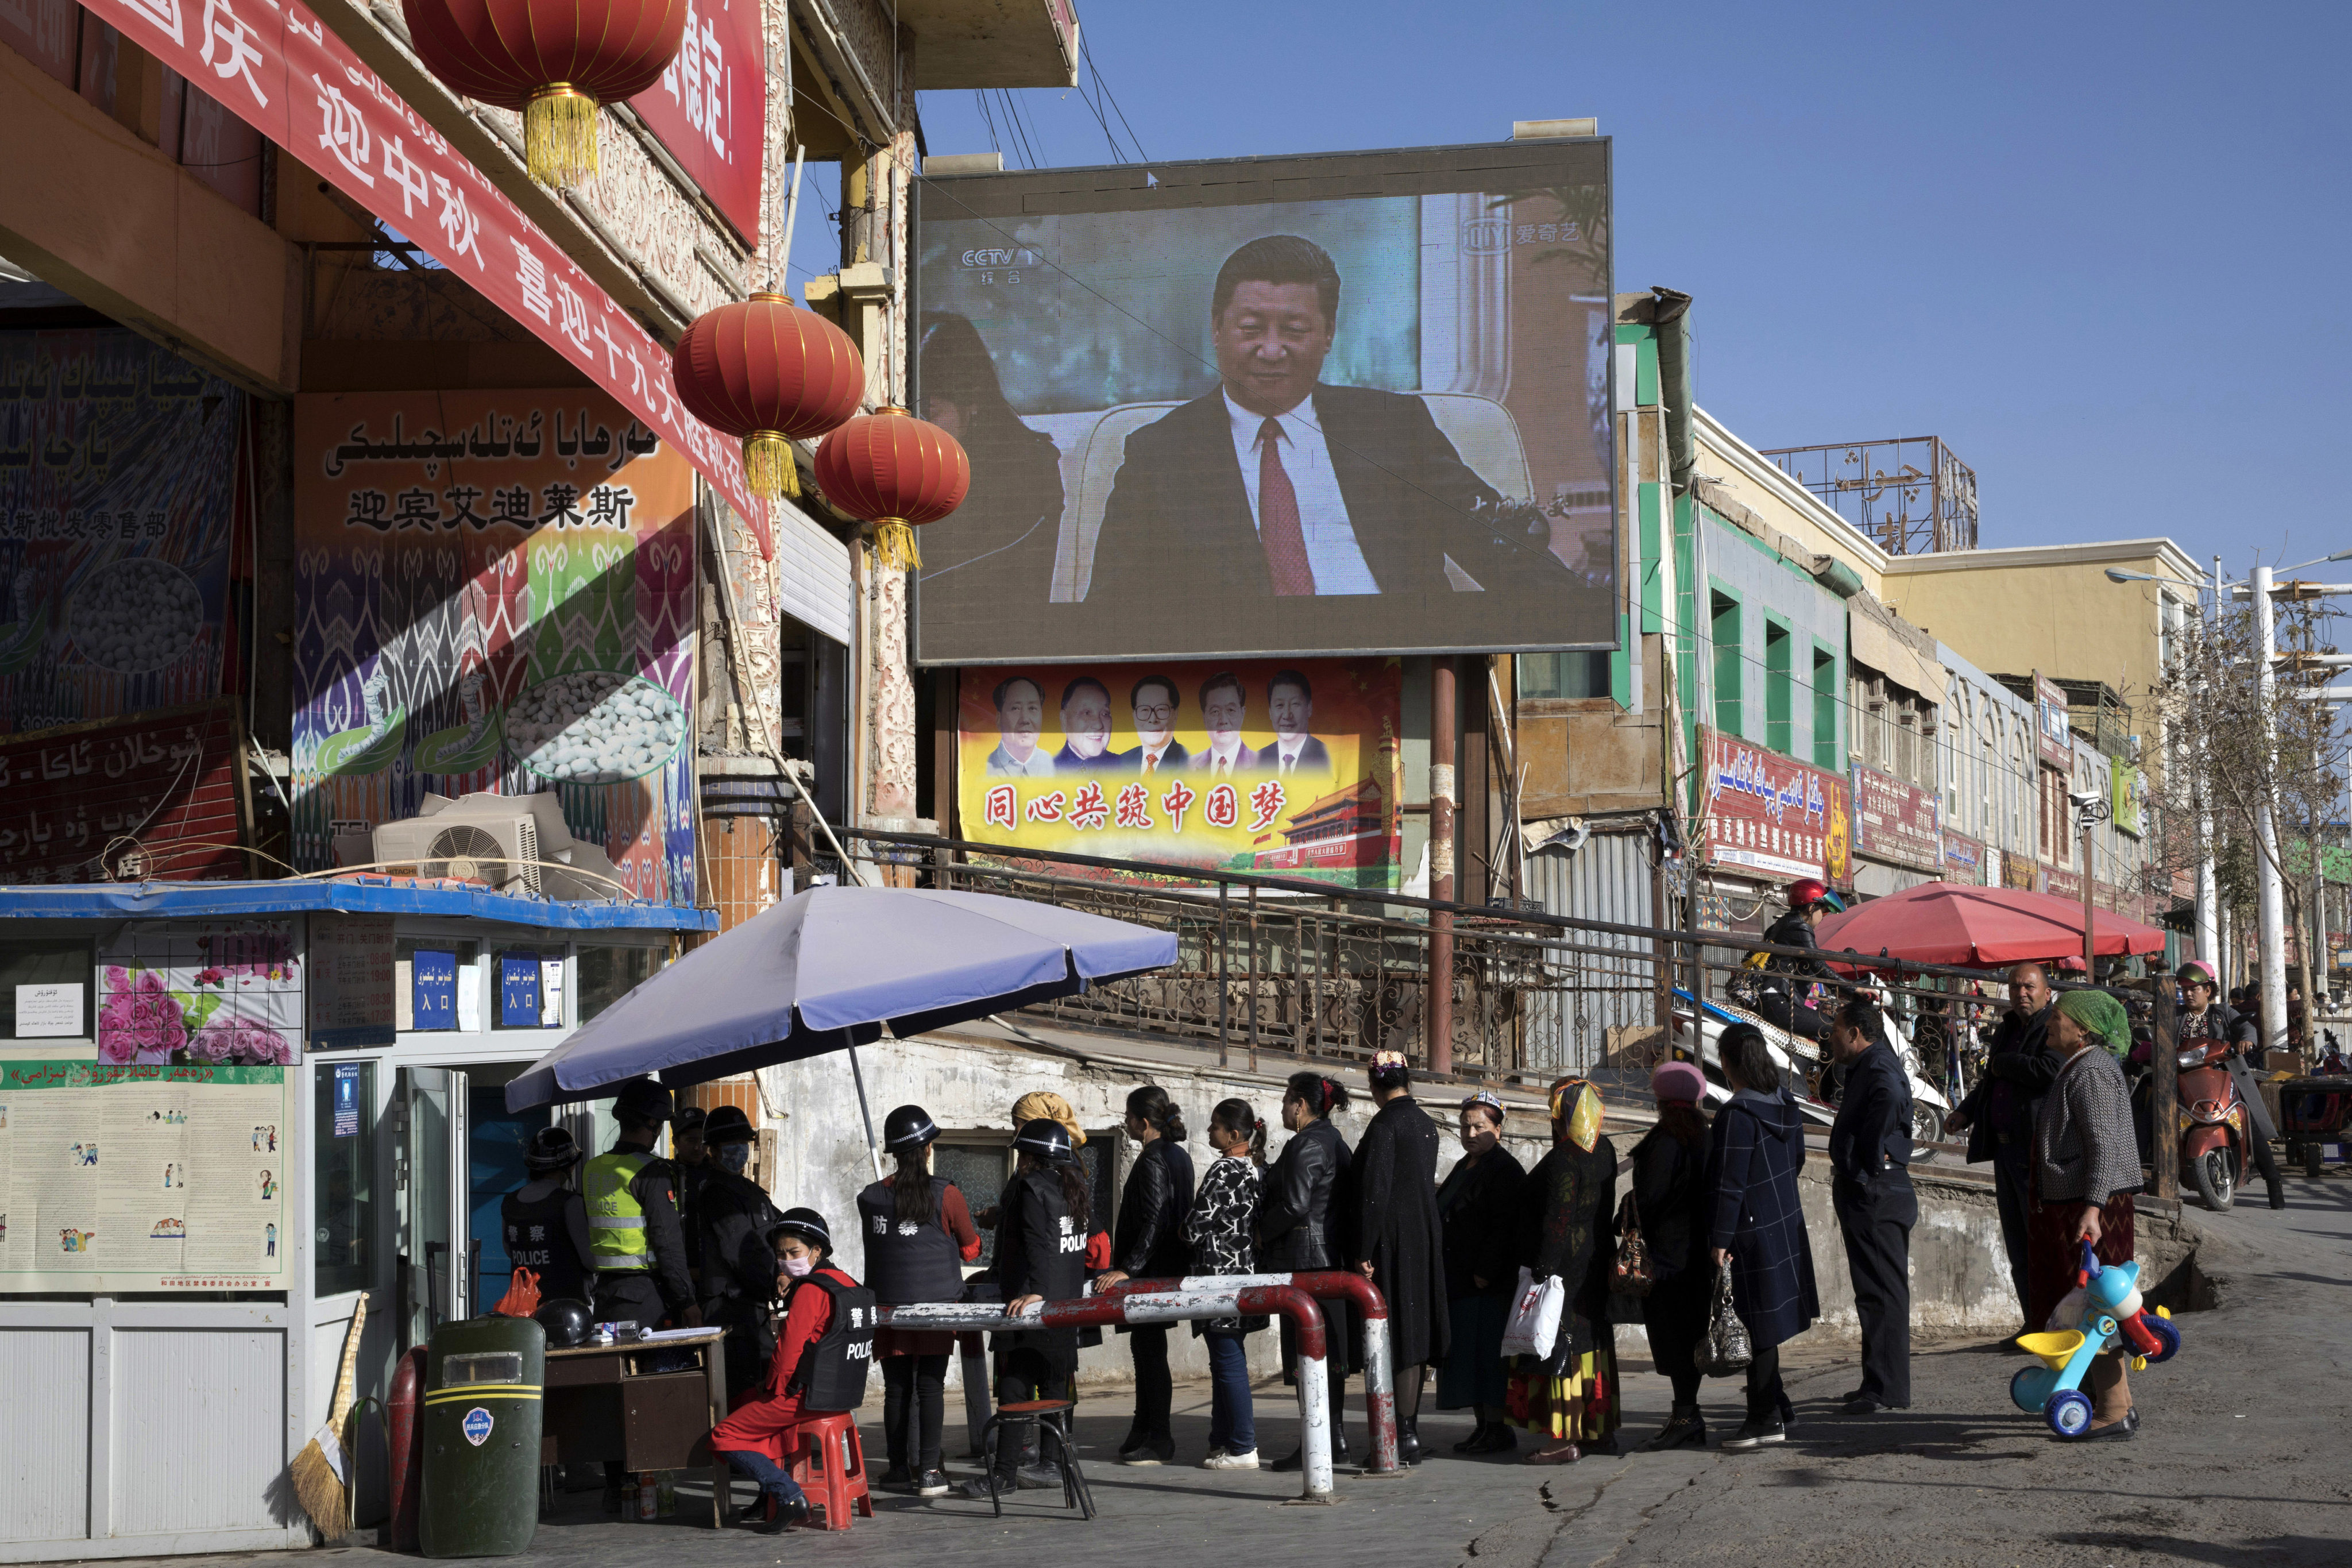 A security checkpoint in Hotan, Xinjiang. Beijing is accused of extensive human rights abuses against the region’s Muslim population. Photo: AP 